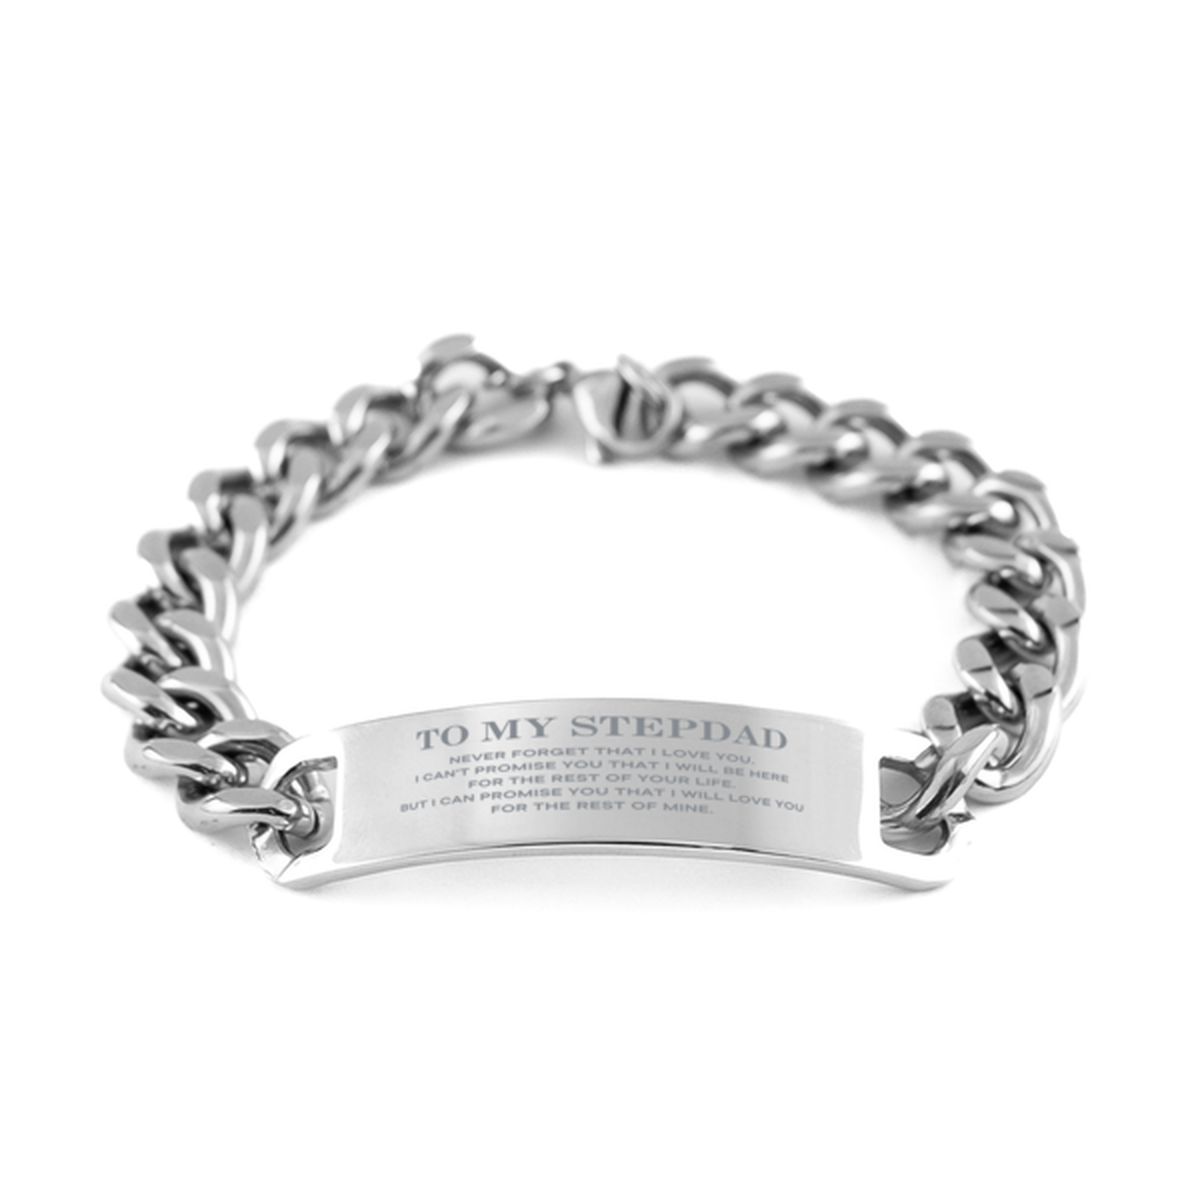 To My Stepdad Gifts, I will love you for the rest of mine, Love Stepdad Bracelet, Birthday Christmas Unique Cuban Chain Stainless Steel Bracelet For Stepdad